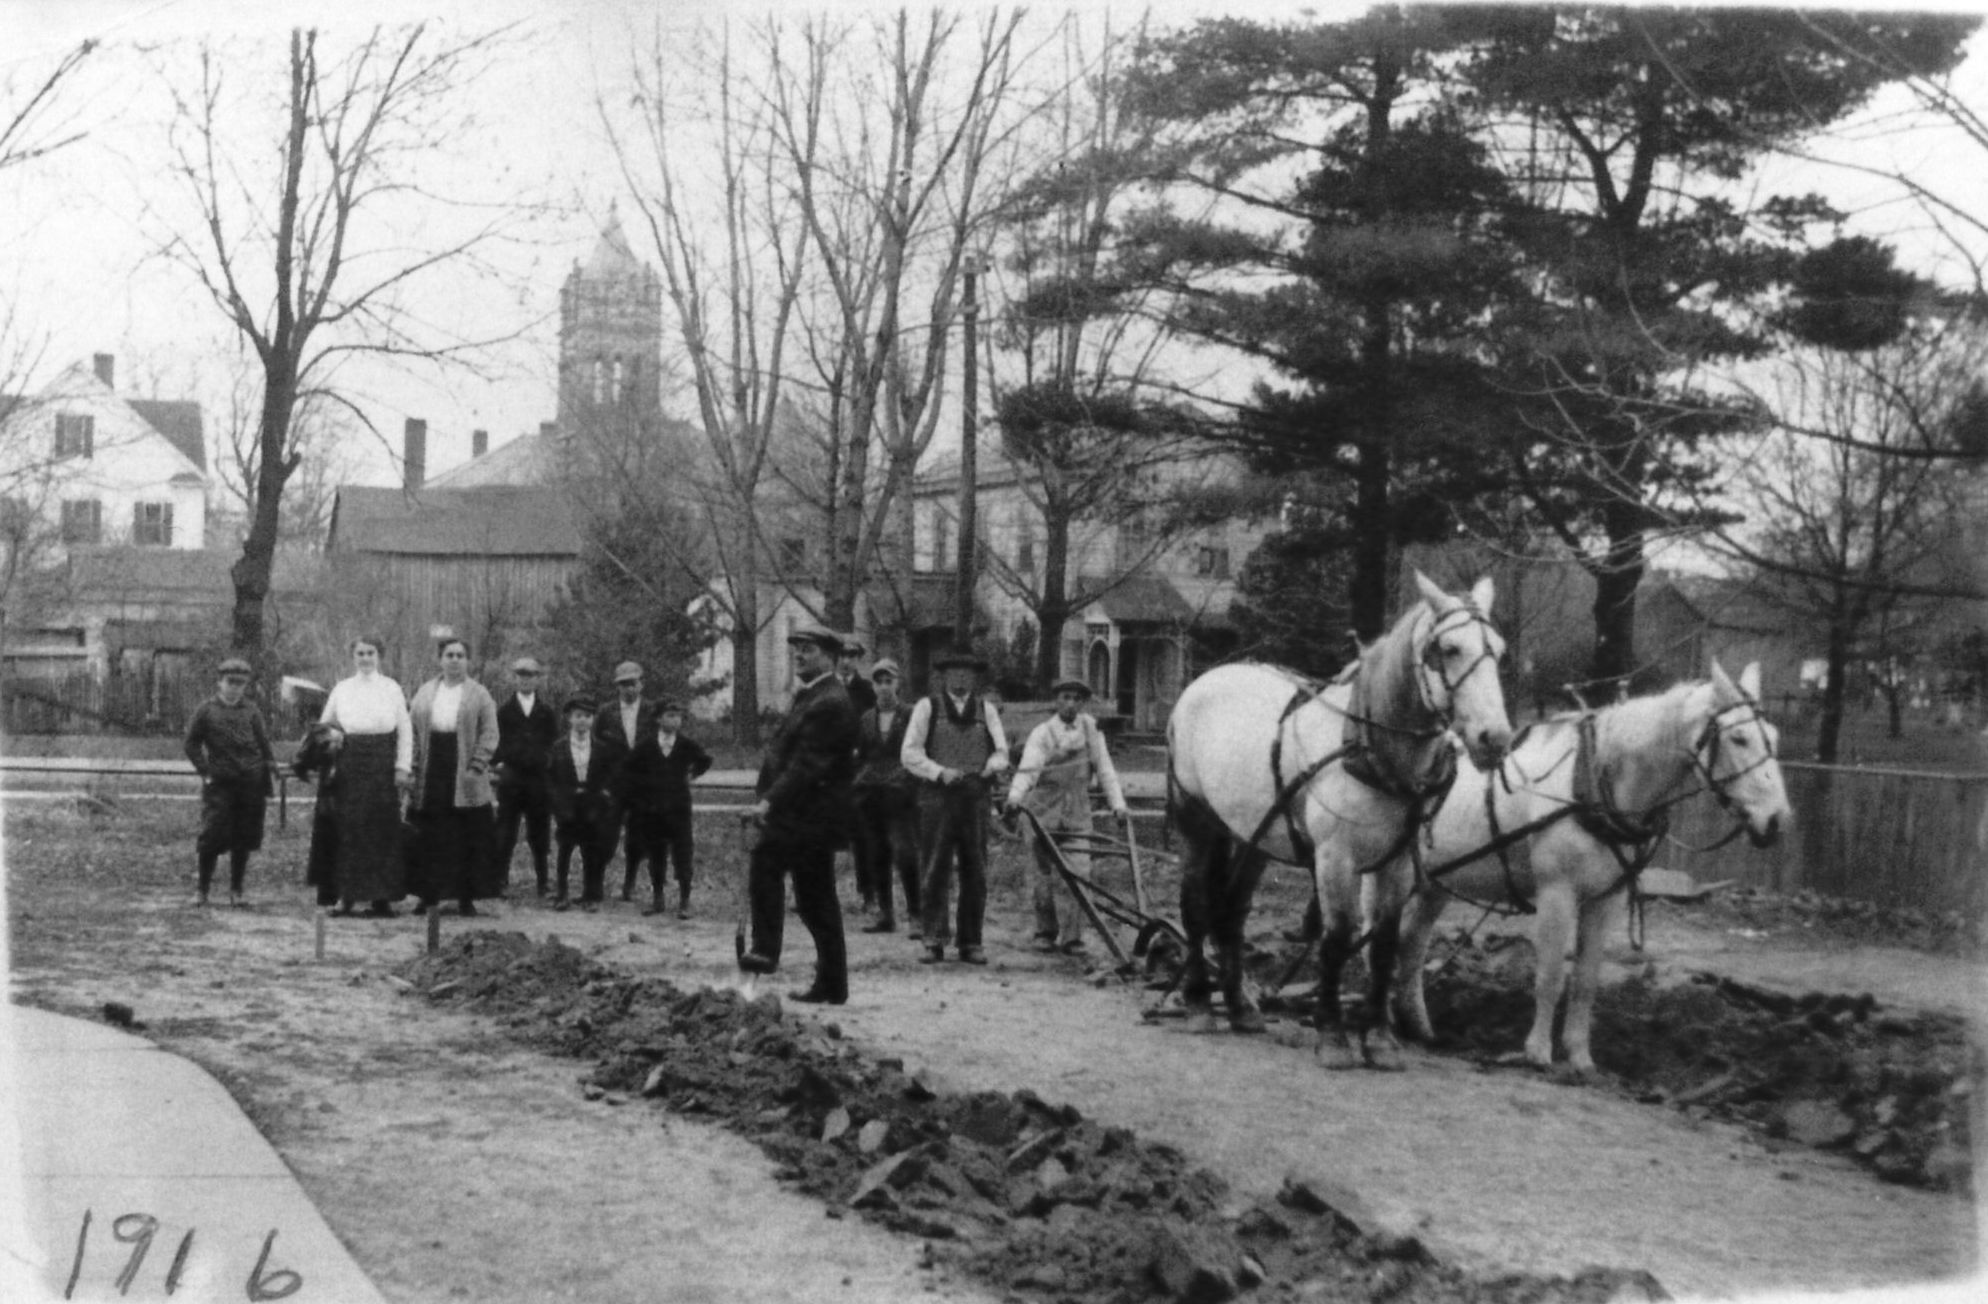 Black & white photo from 1916 showing several people, two horses, and a plow at the groundbreaking of the Winamac Carnegie Library.